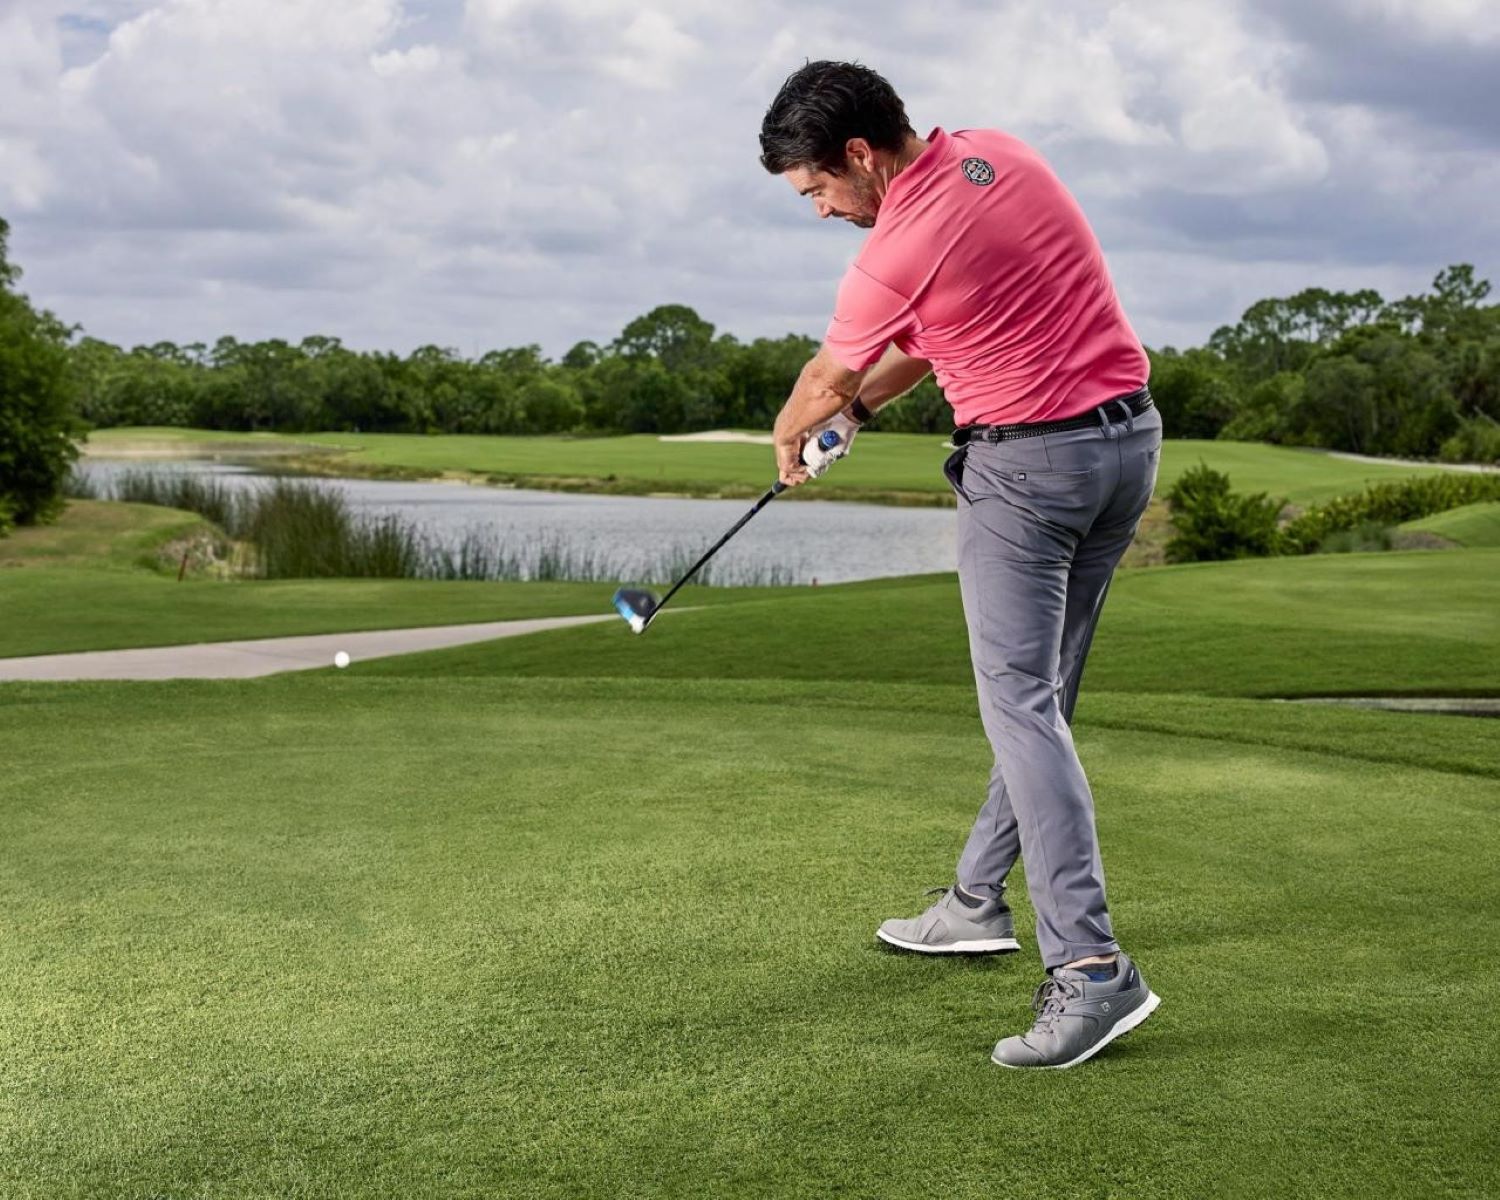 How To Increase Golf Swing Speed